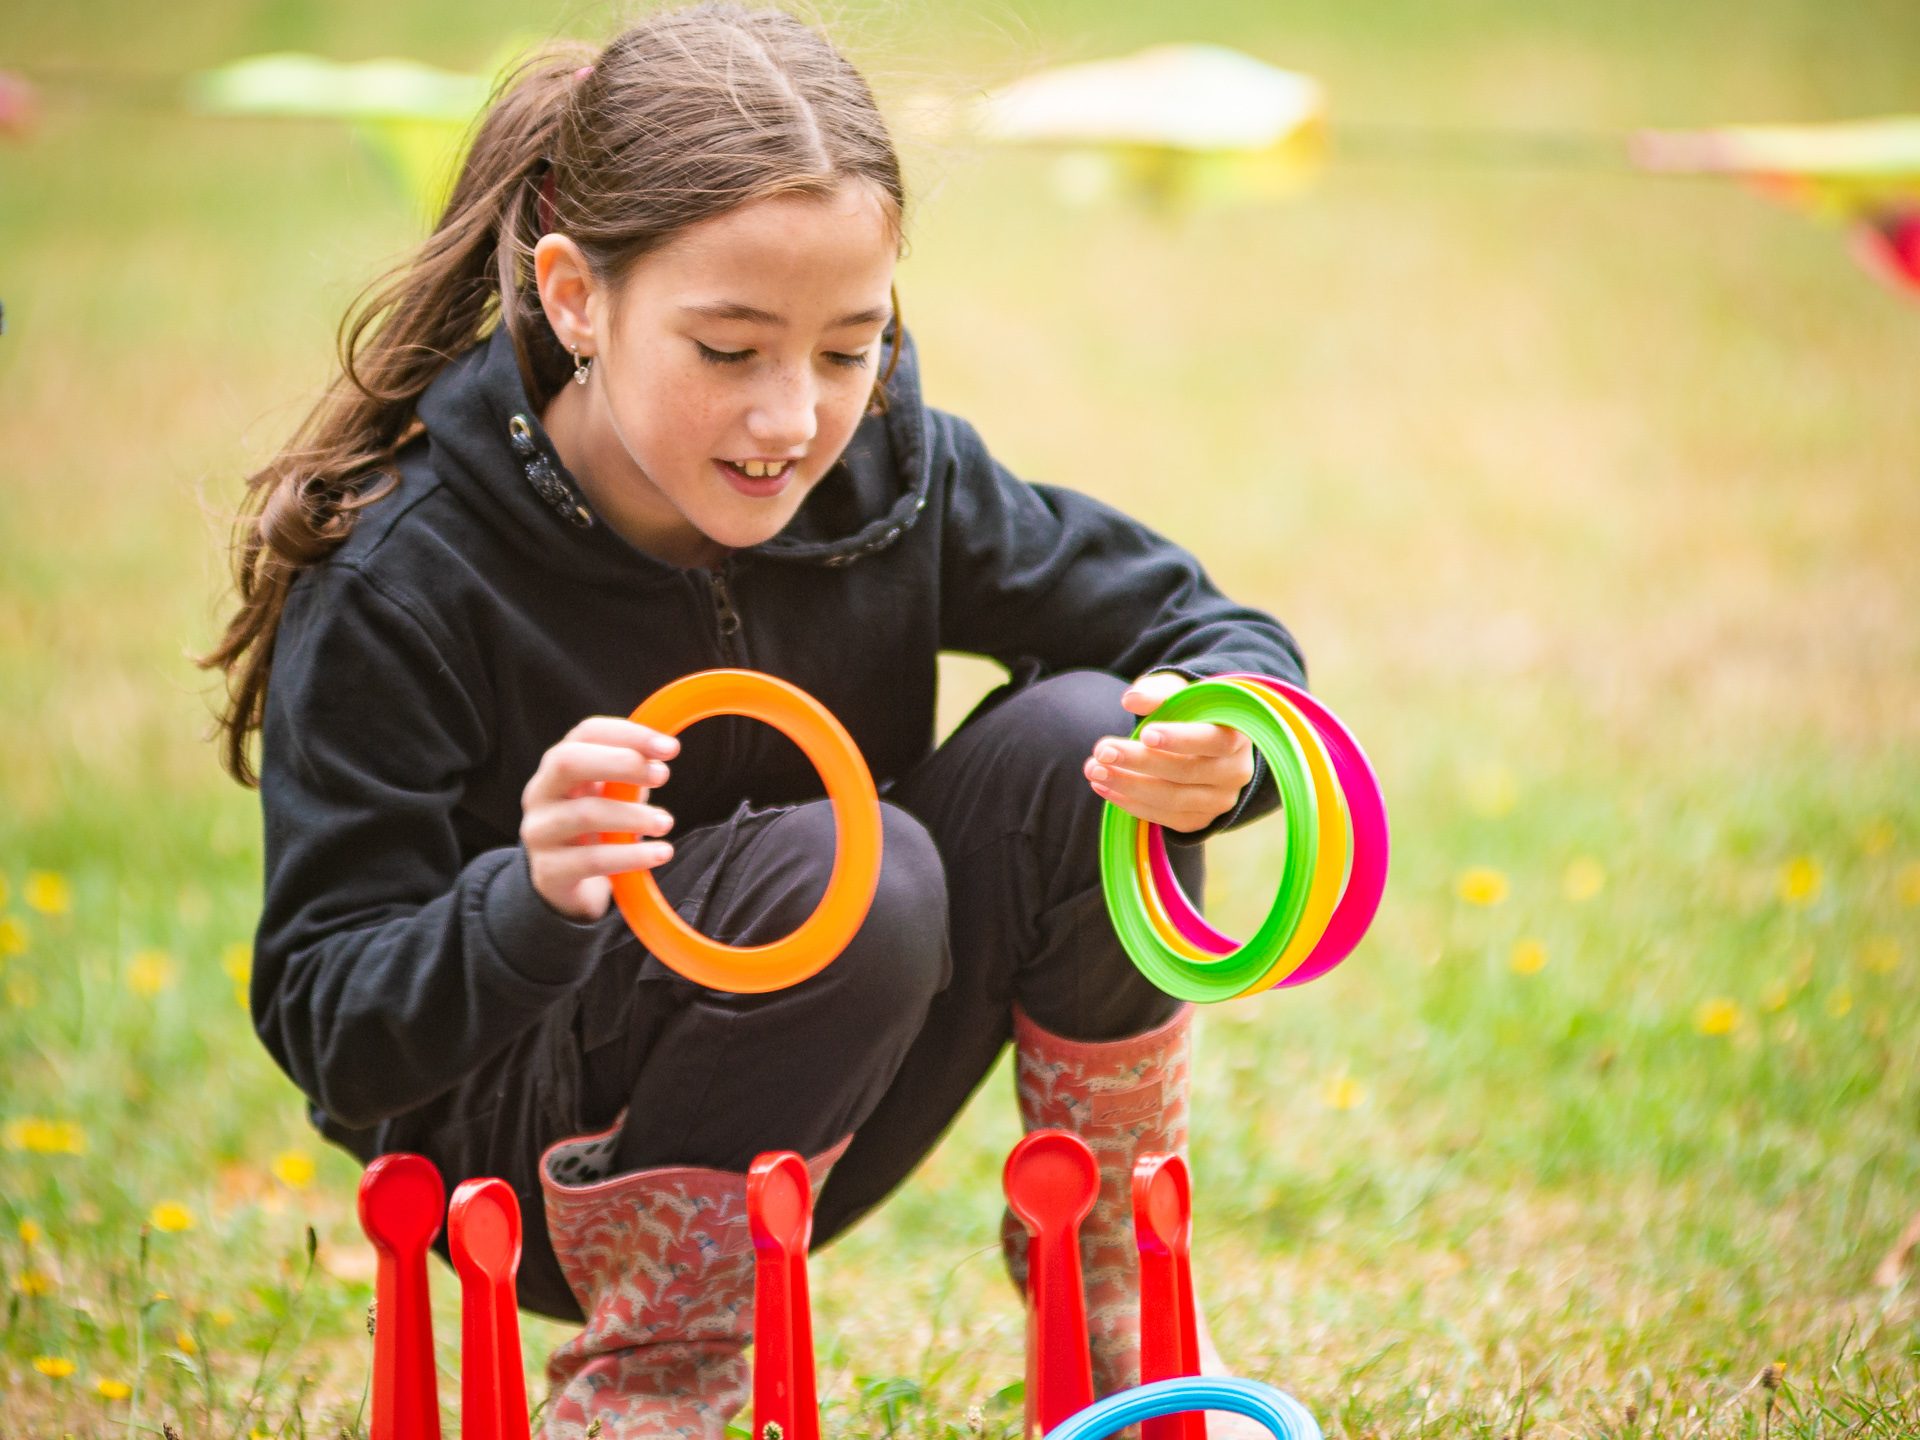 Young girl plays with plastic ring toys